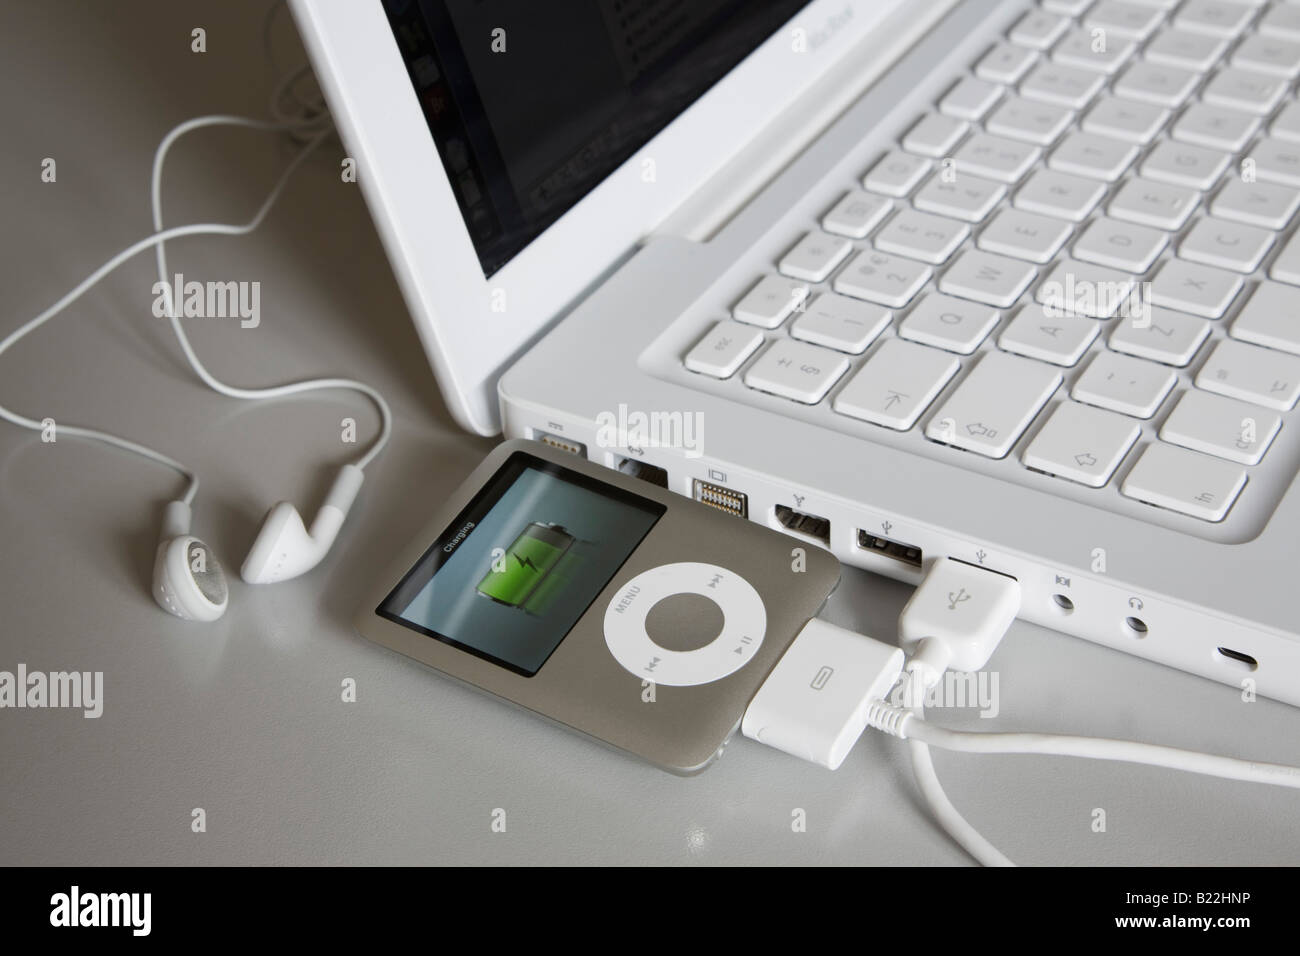 Apple ipod Nano 3rd generation MP3 player connected to white MacBook laptop  computer USB port to charge battery Stock Photo - Alamy